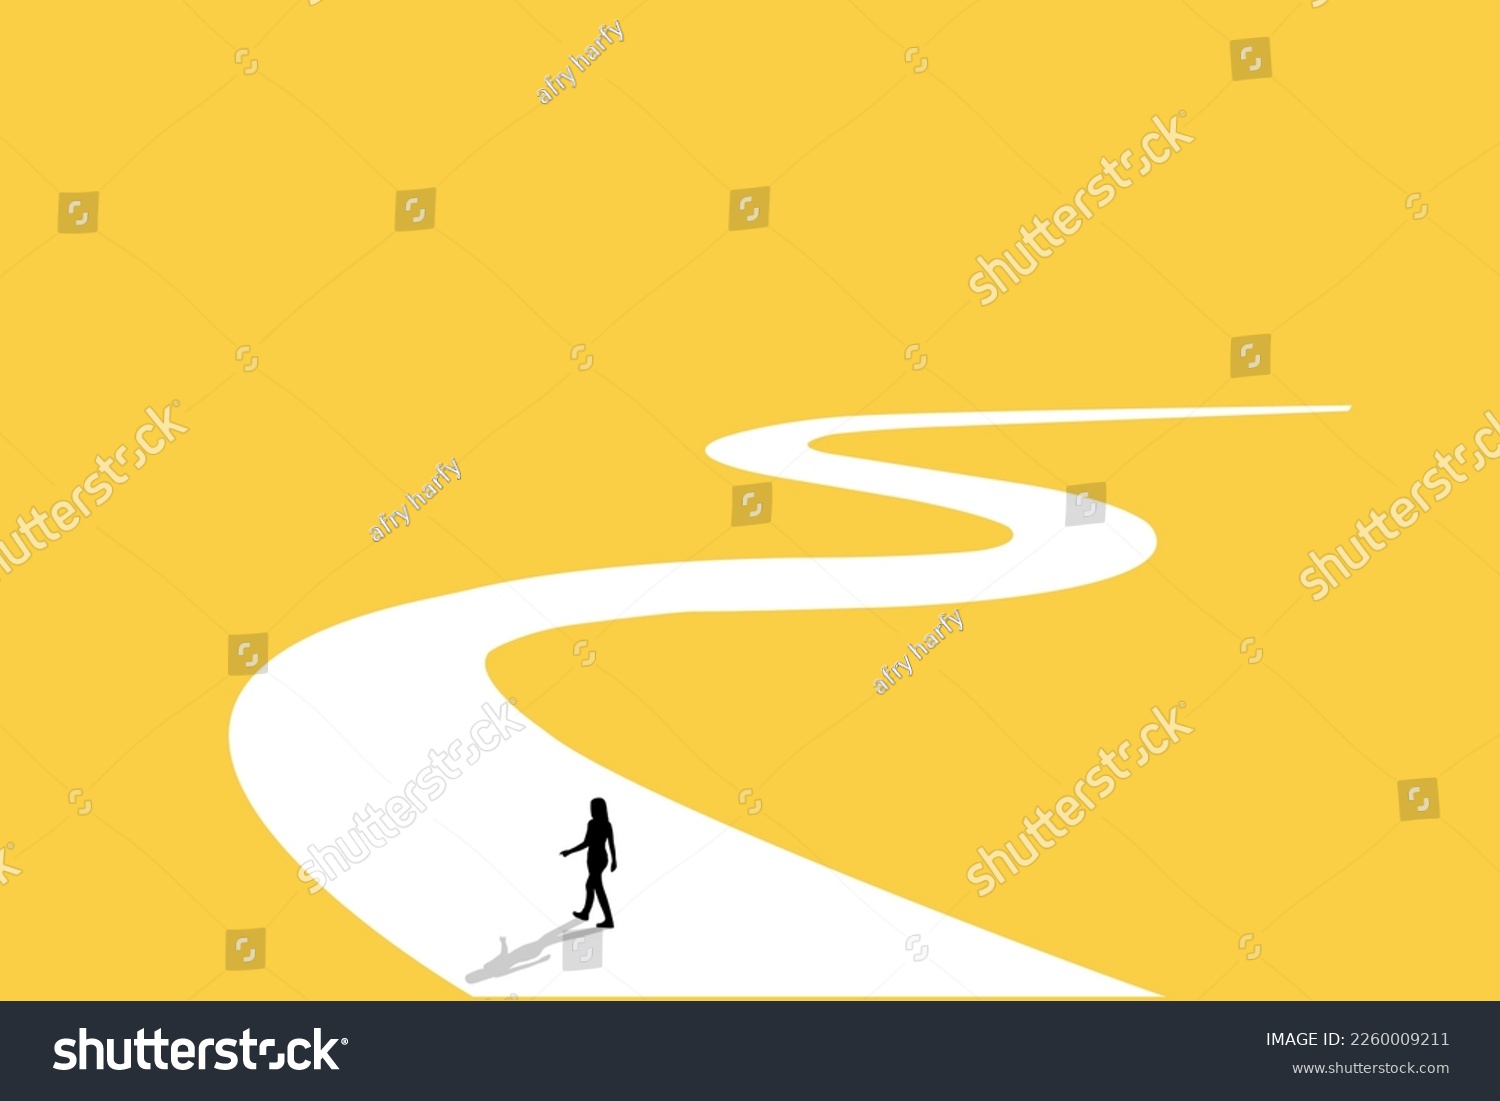 SVG of Business woman follow a path for business opportunities. visionary leadership different business routes. Symbol of ambition, motivation and long road ahead svg